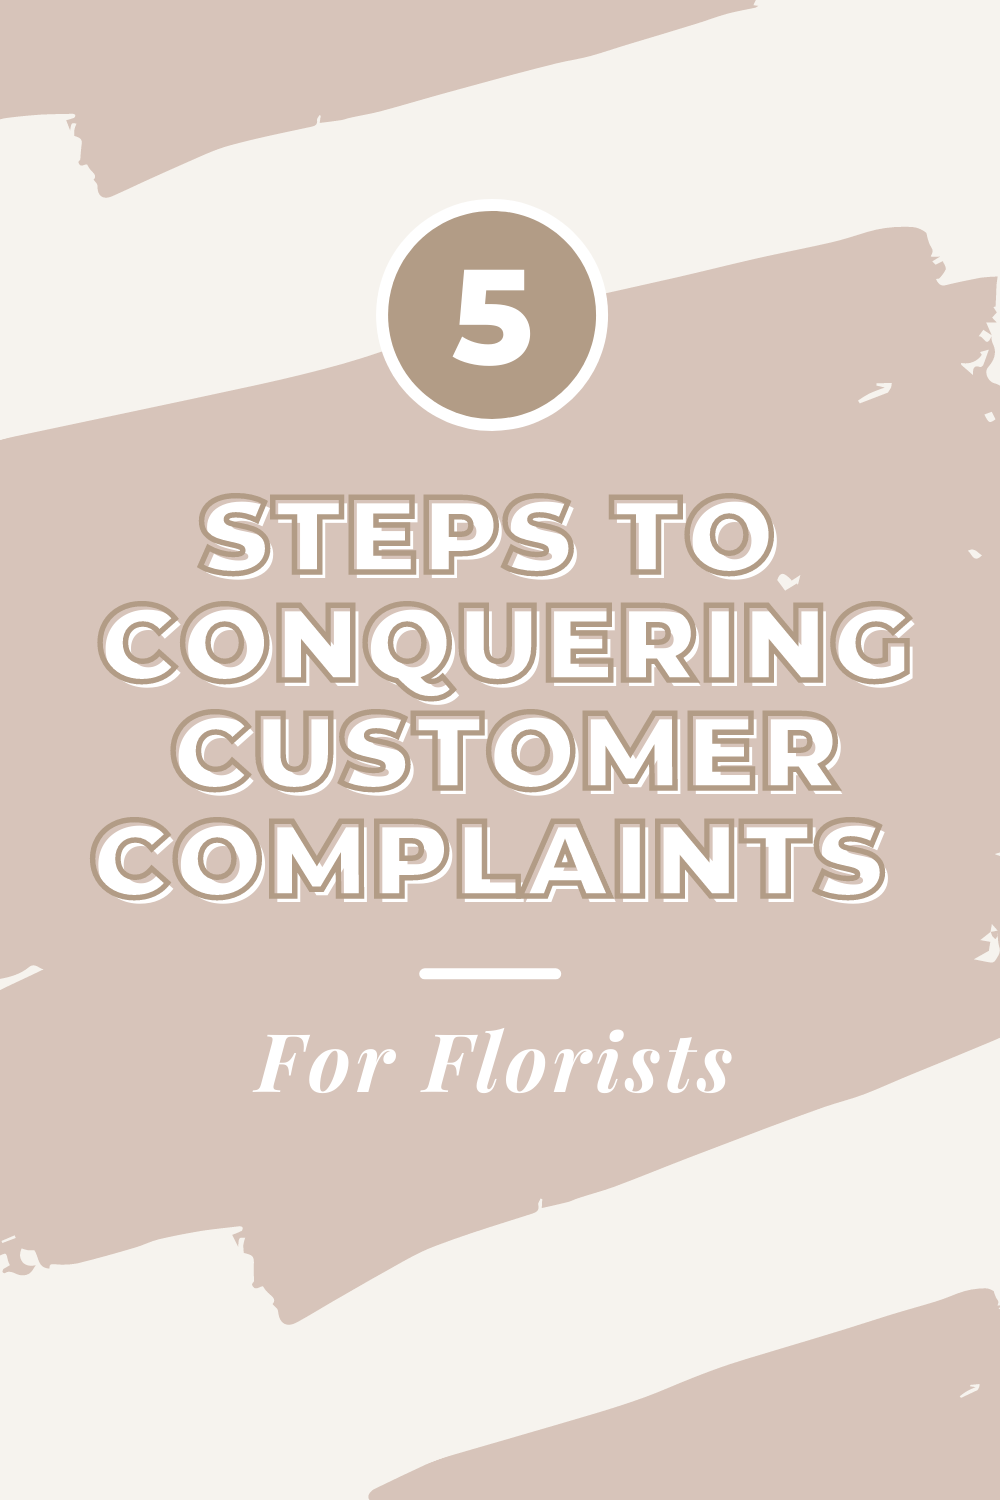 How to Handle Customer Complaints in Floristry